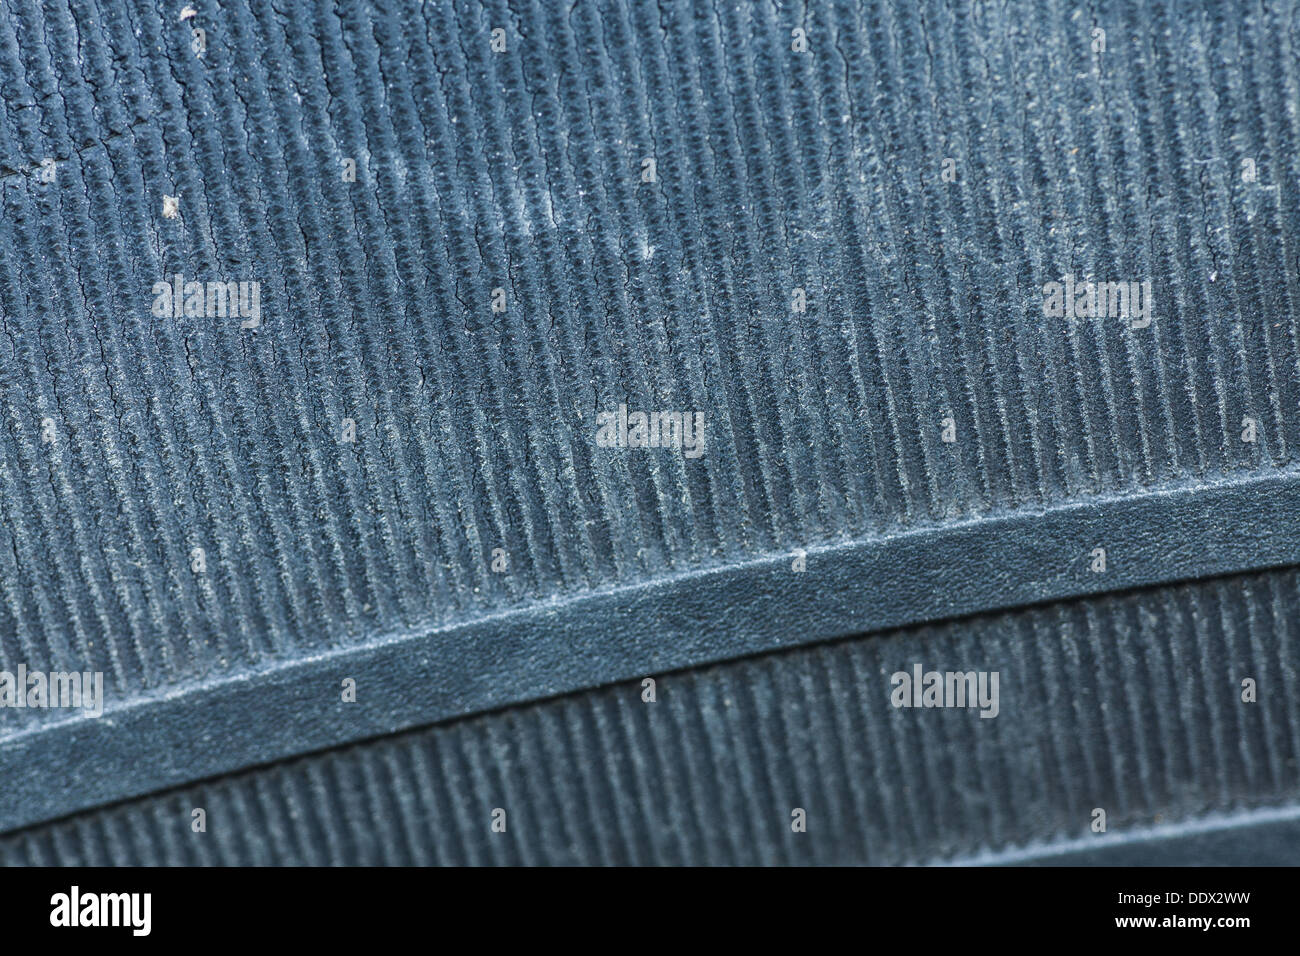 close-up of tire sidewall for use as texture background Stock Photo